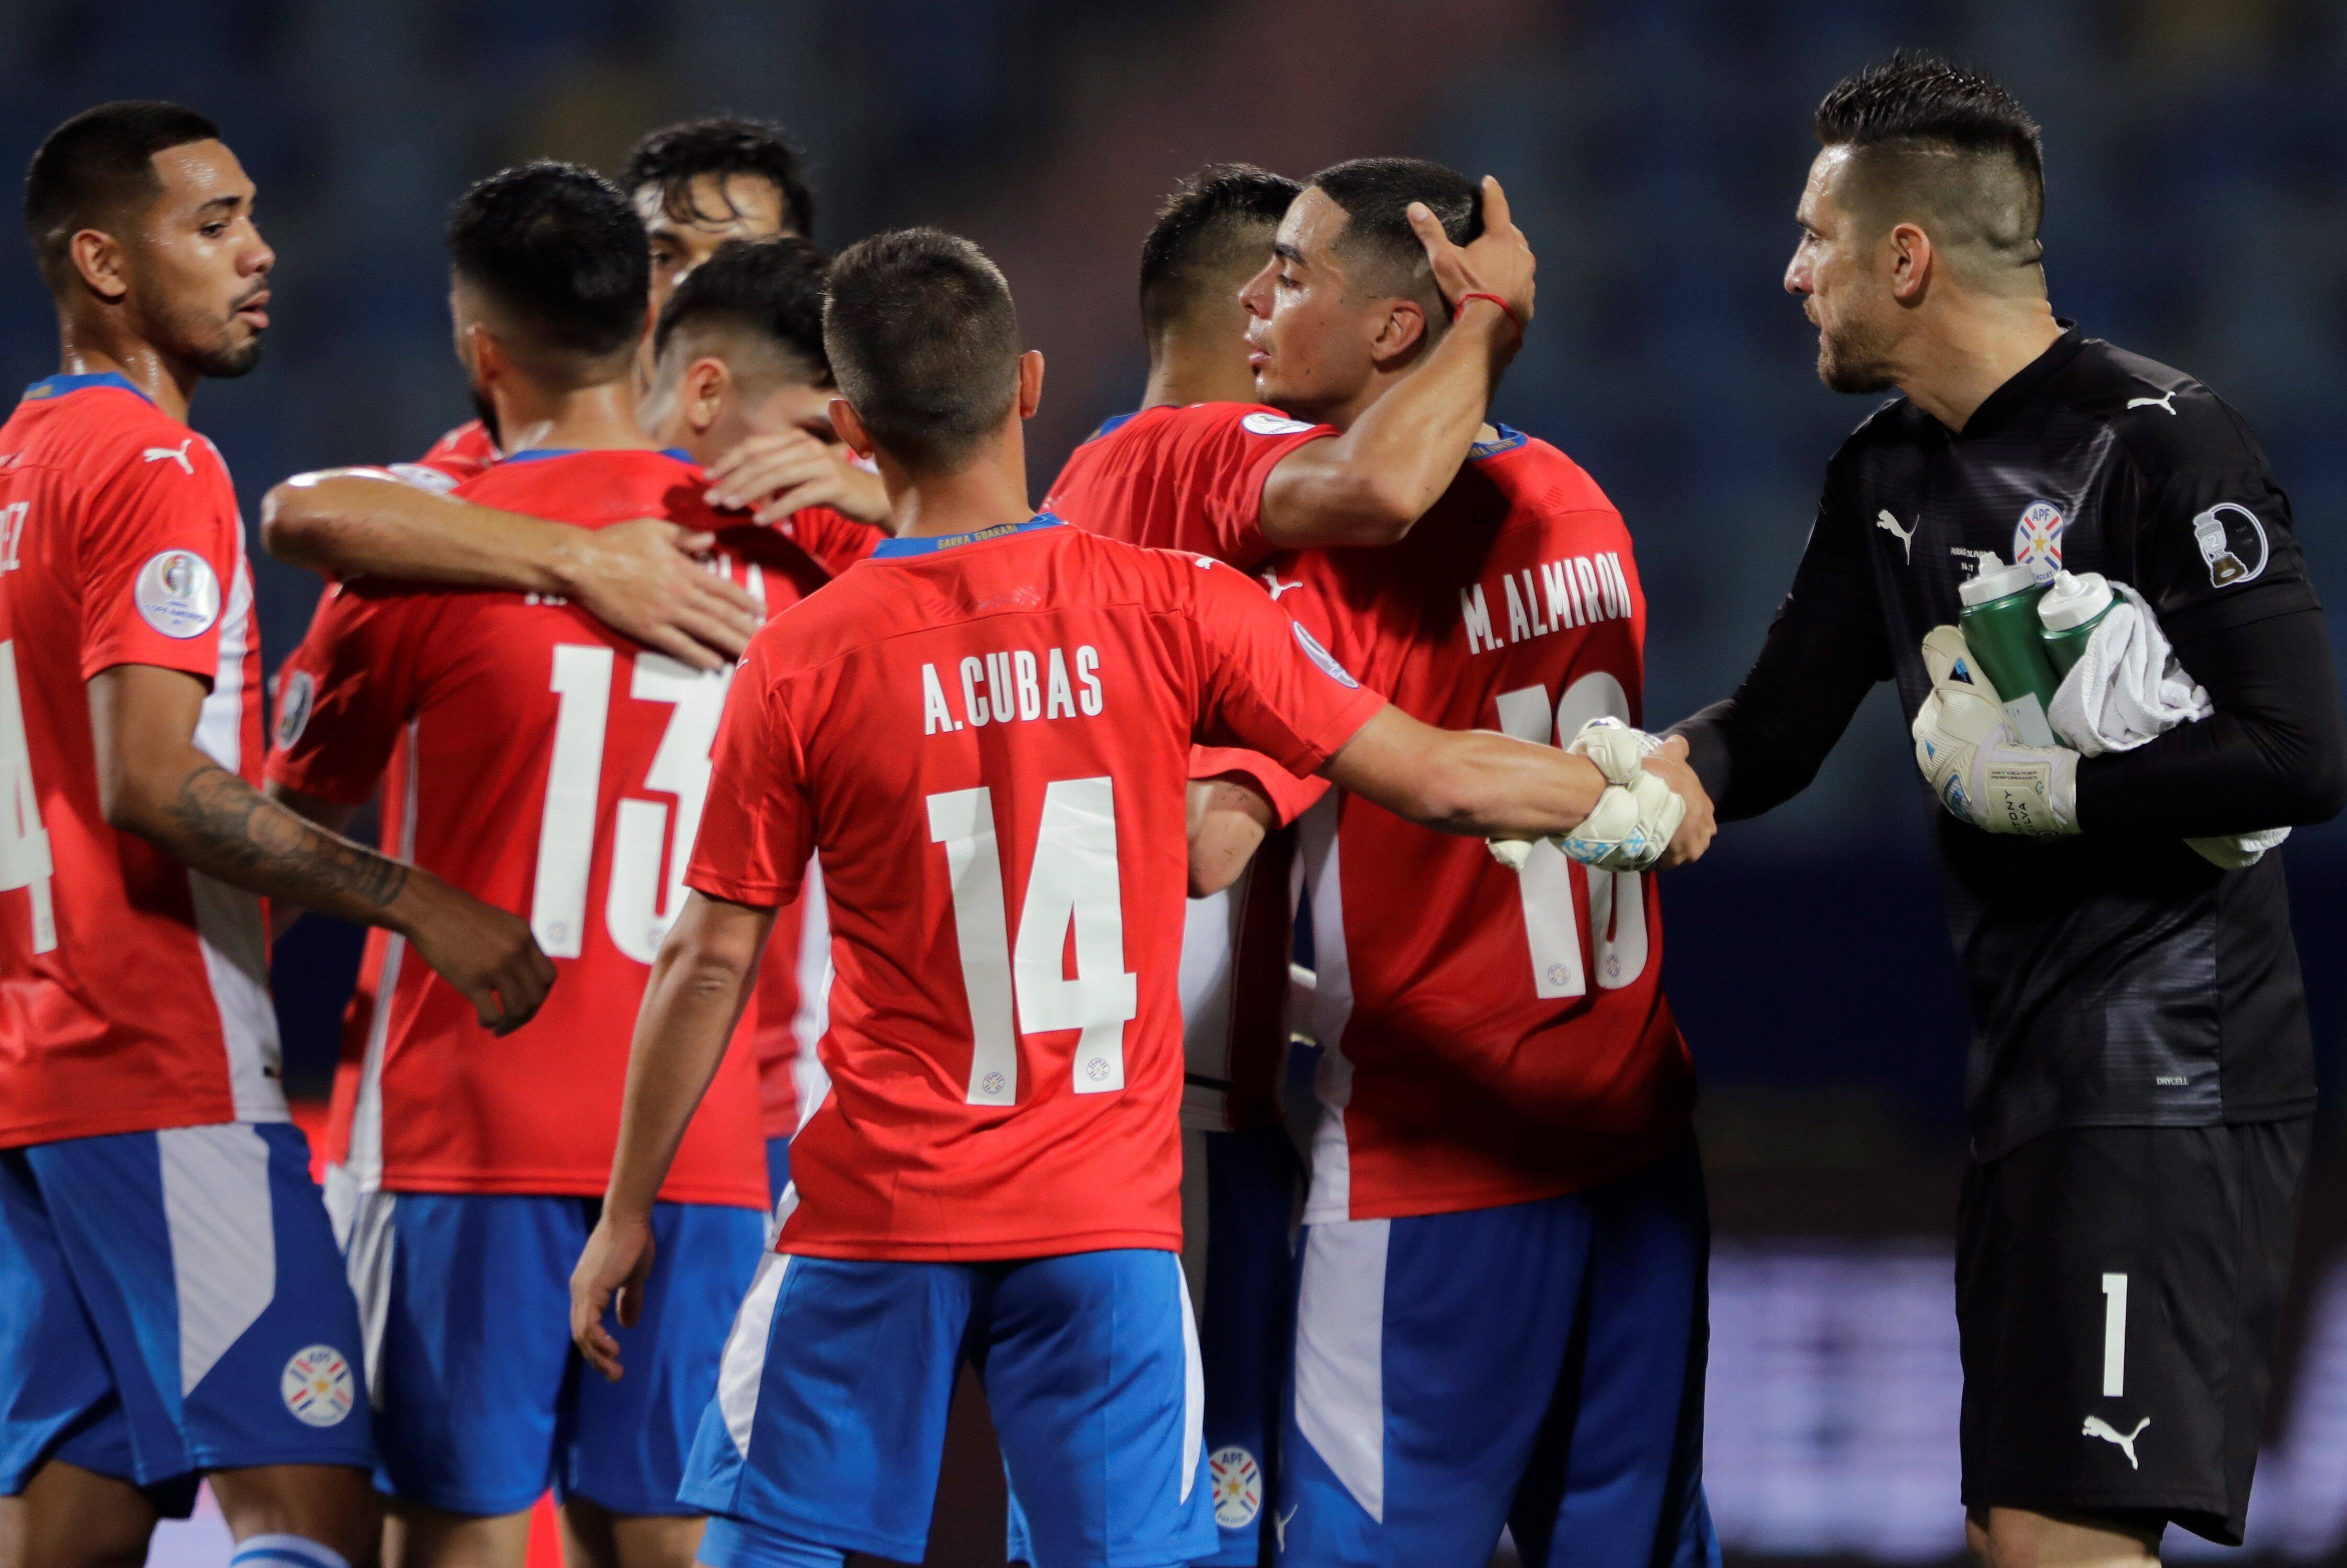 Paraguay S Players Celebrate Victory Against Bolivia, After The End Of A Match For The Copa America At The Pedro Ludovi